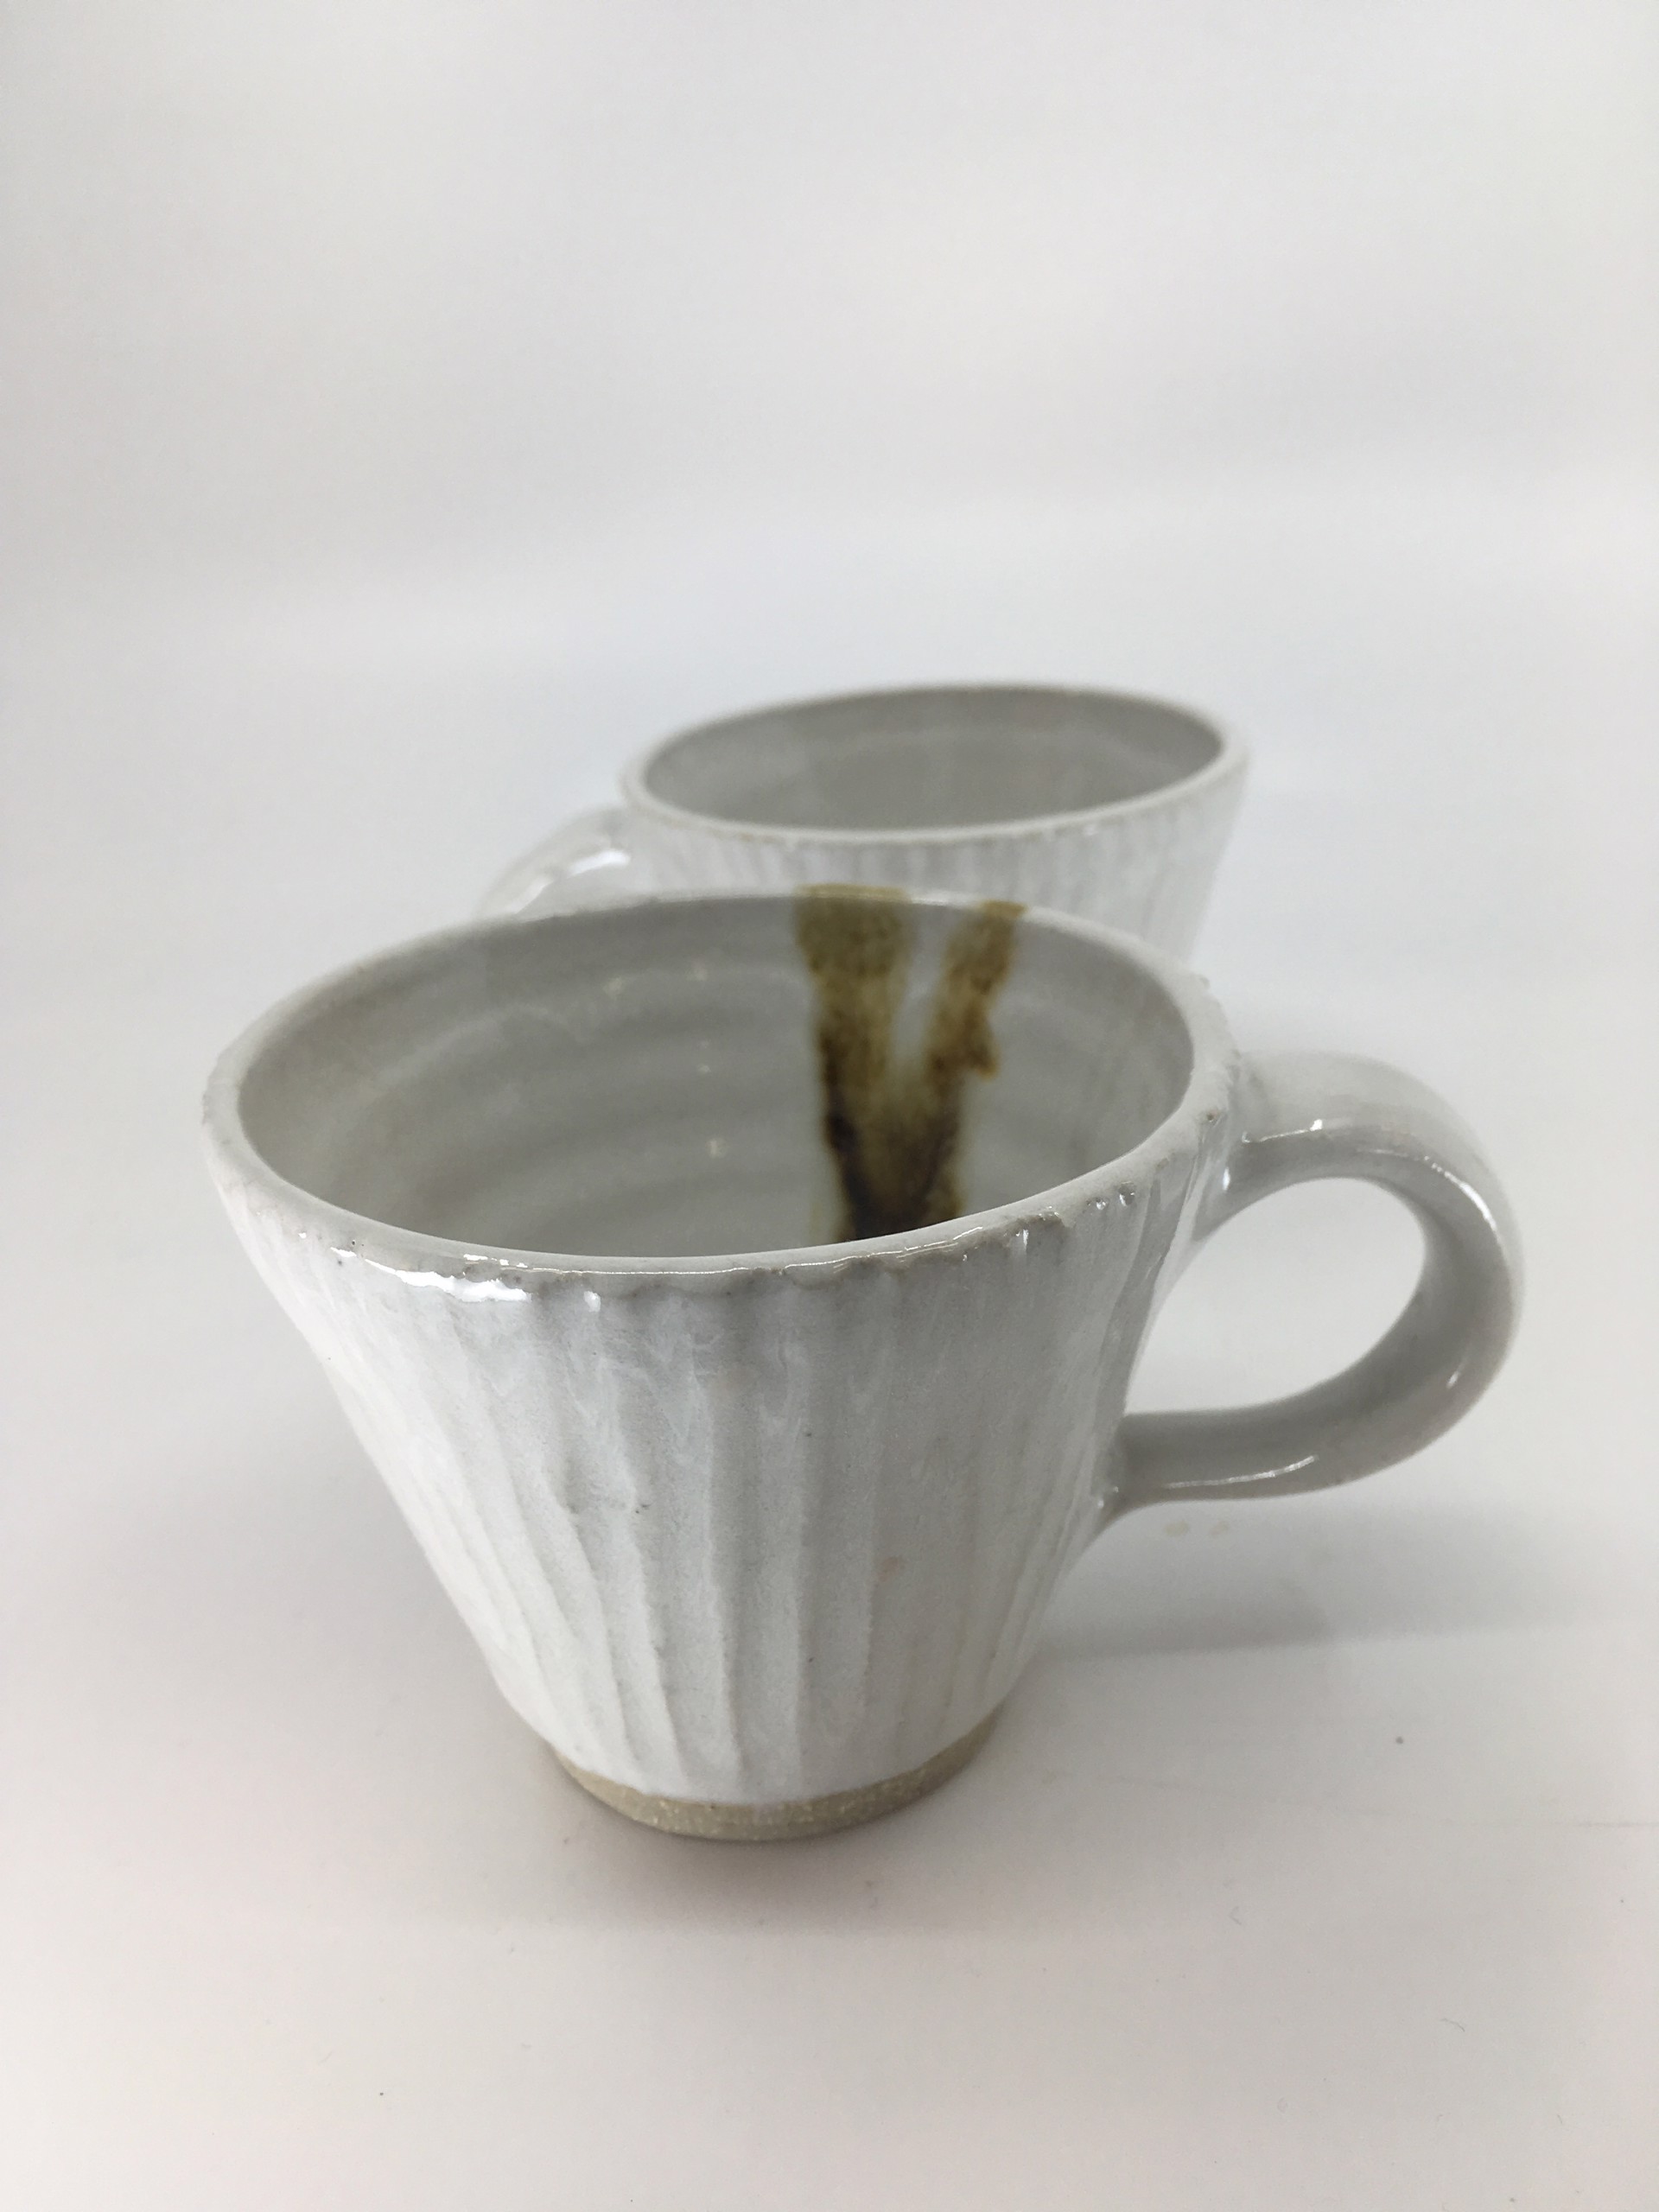 Teacup, vertically carved with amber drip by Monica Plank